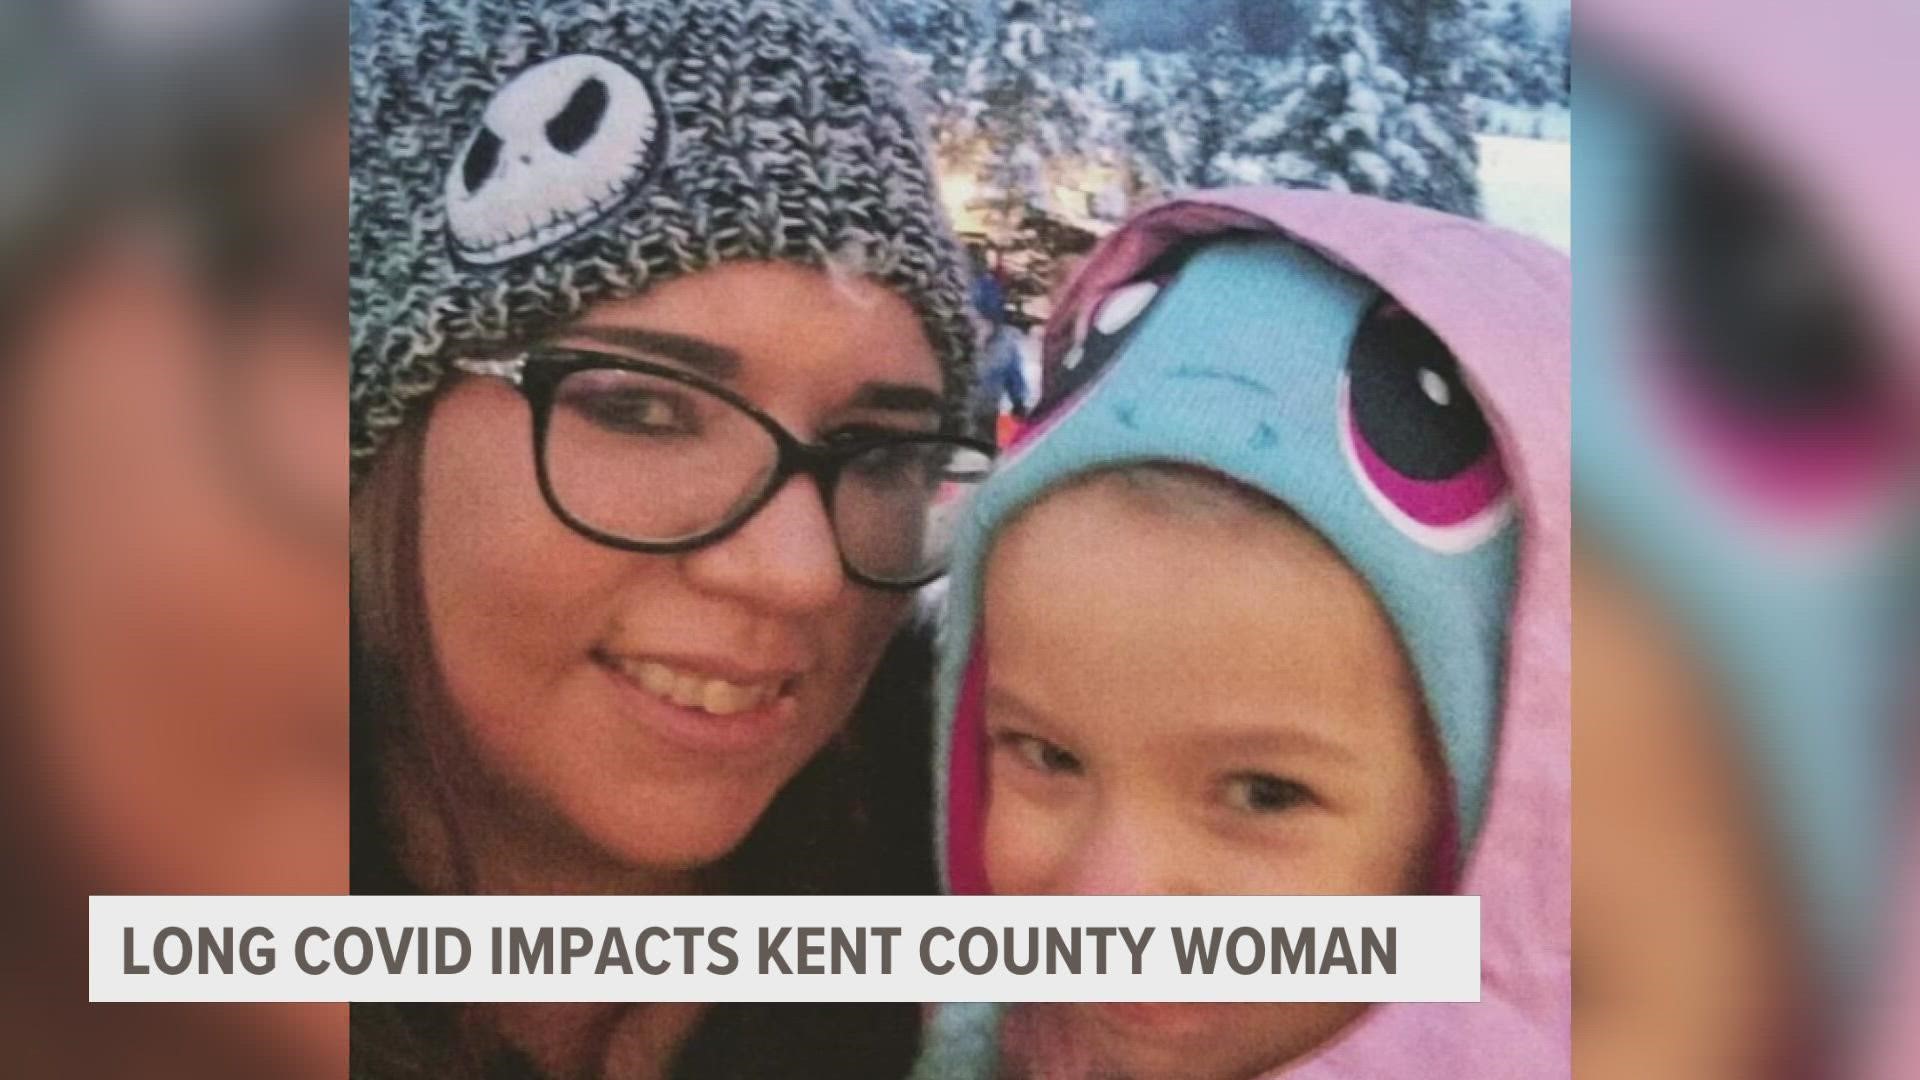 Almost a year since a Kent County woman contracted COVID-19, she says she's still not better. Long COVID is considered a disability.